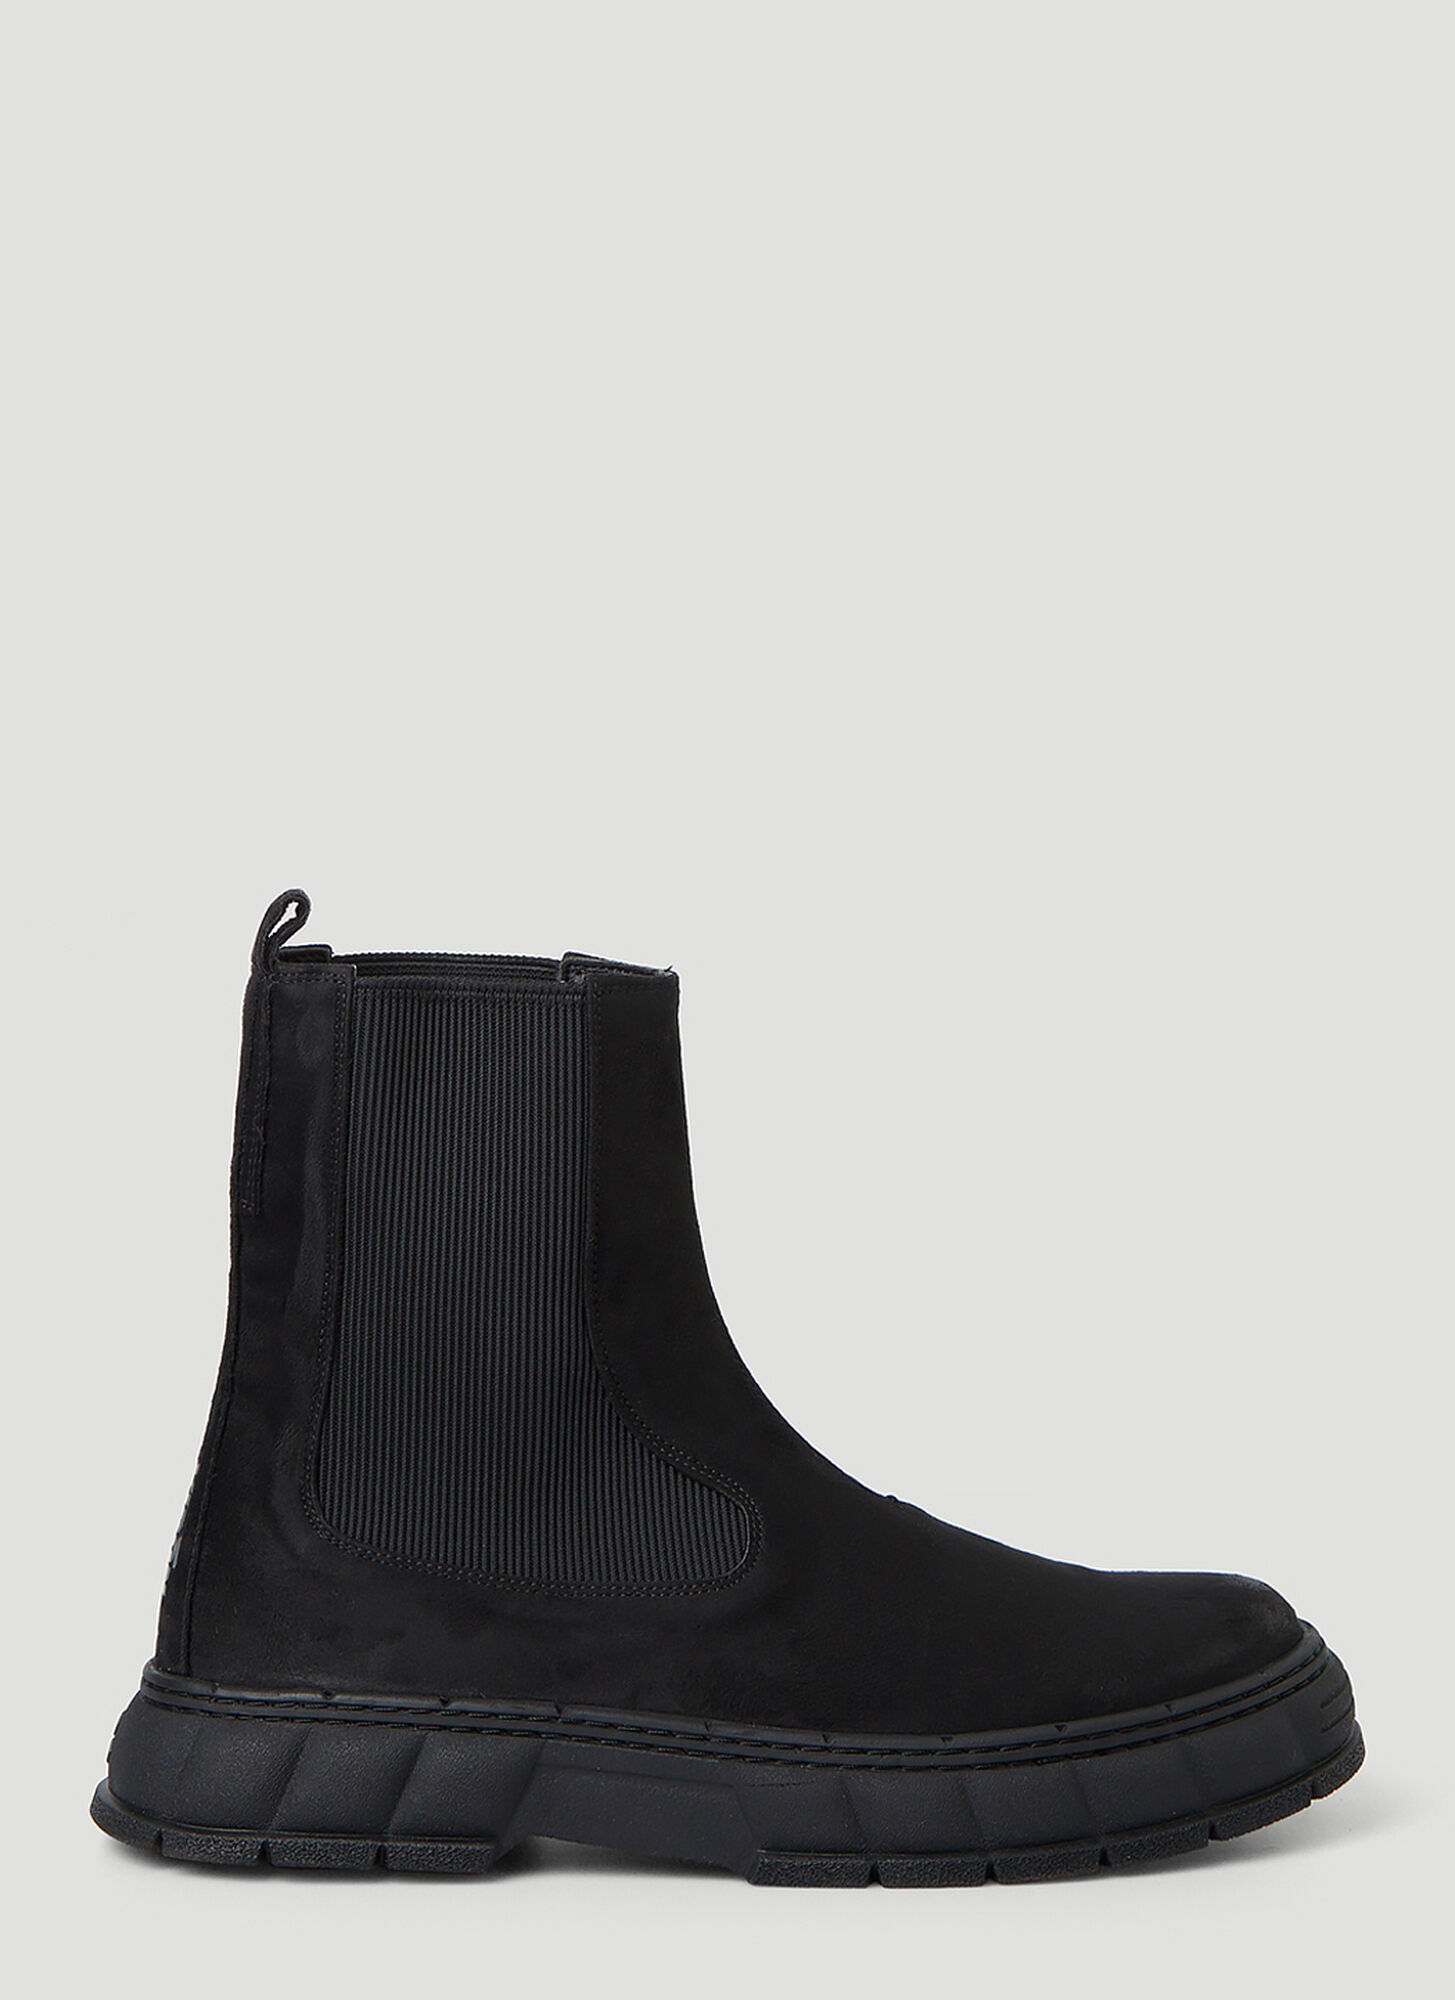 VIRON 1997 RECYCLED CHELSEA BOOTS